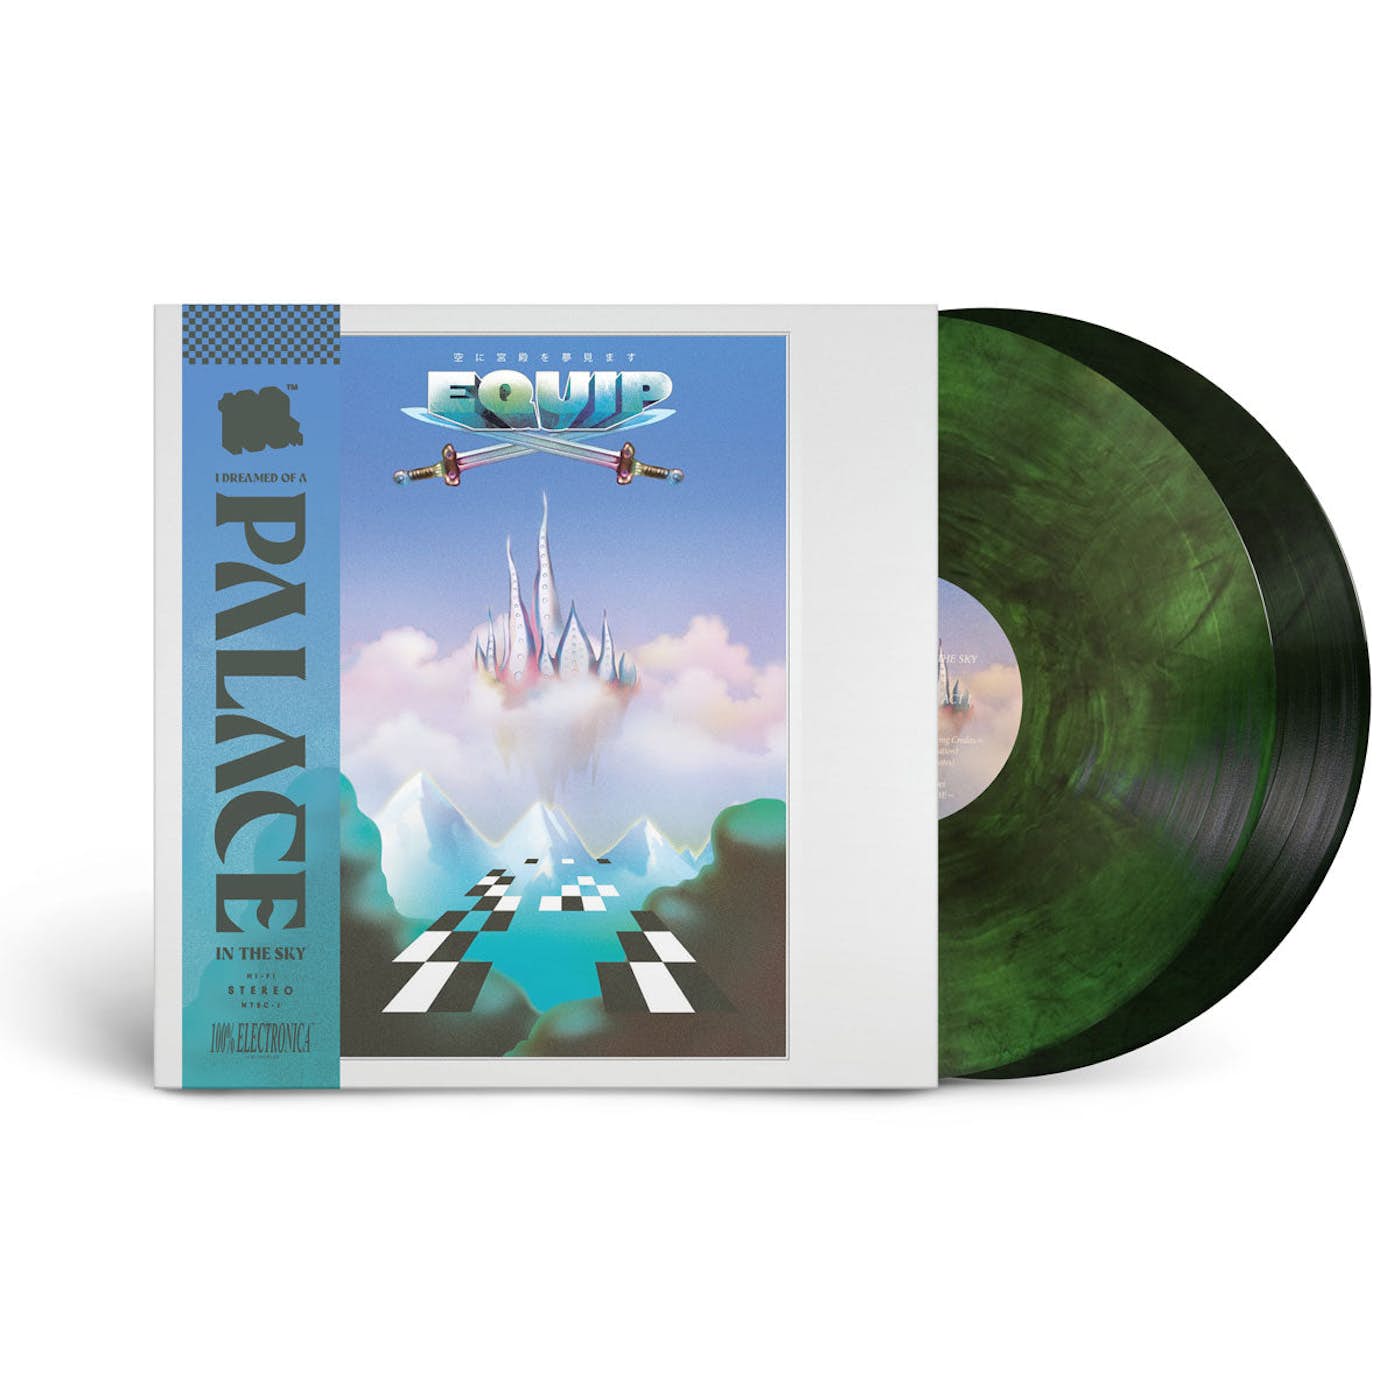 EQUIP "I Dreamed Of A Palace In The Sky" vinyl 2xLP (color, double LP gatefold)